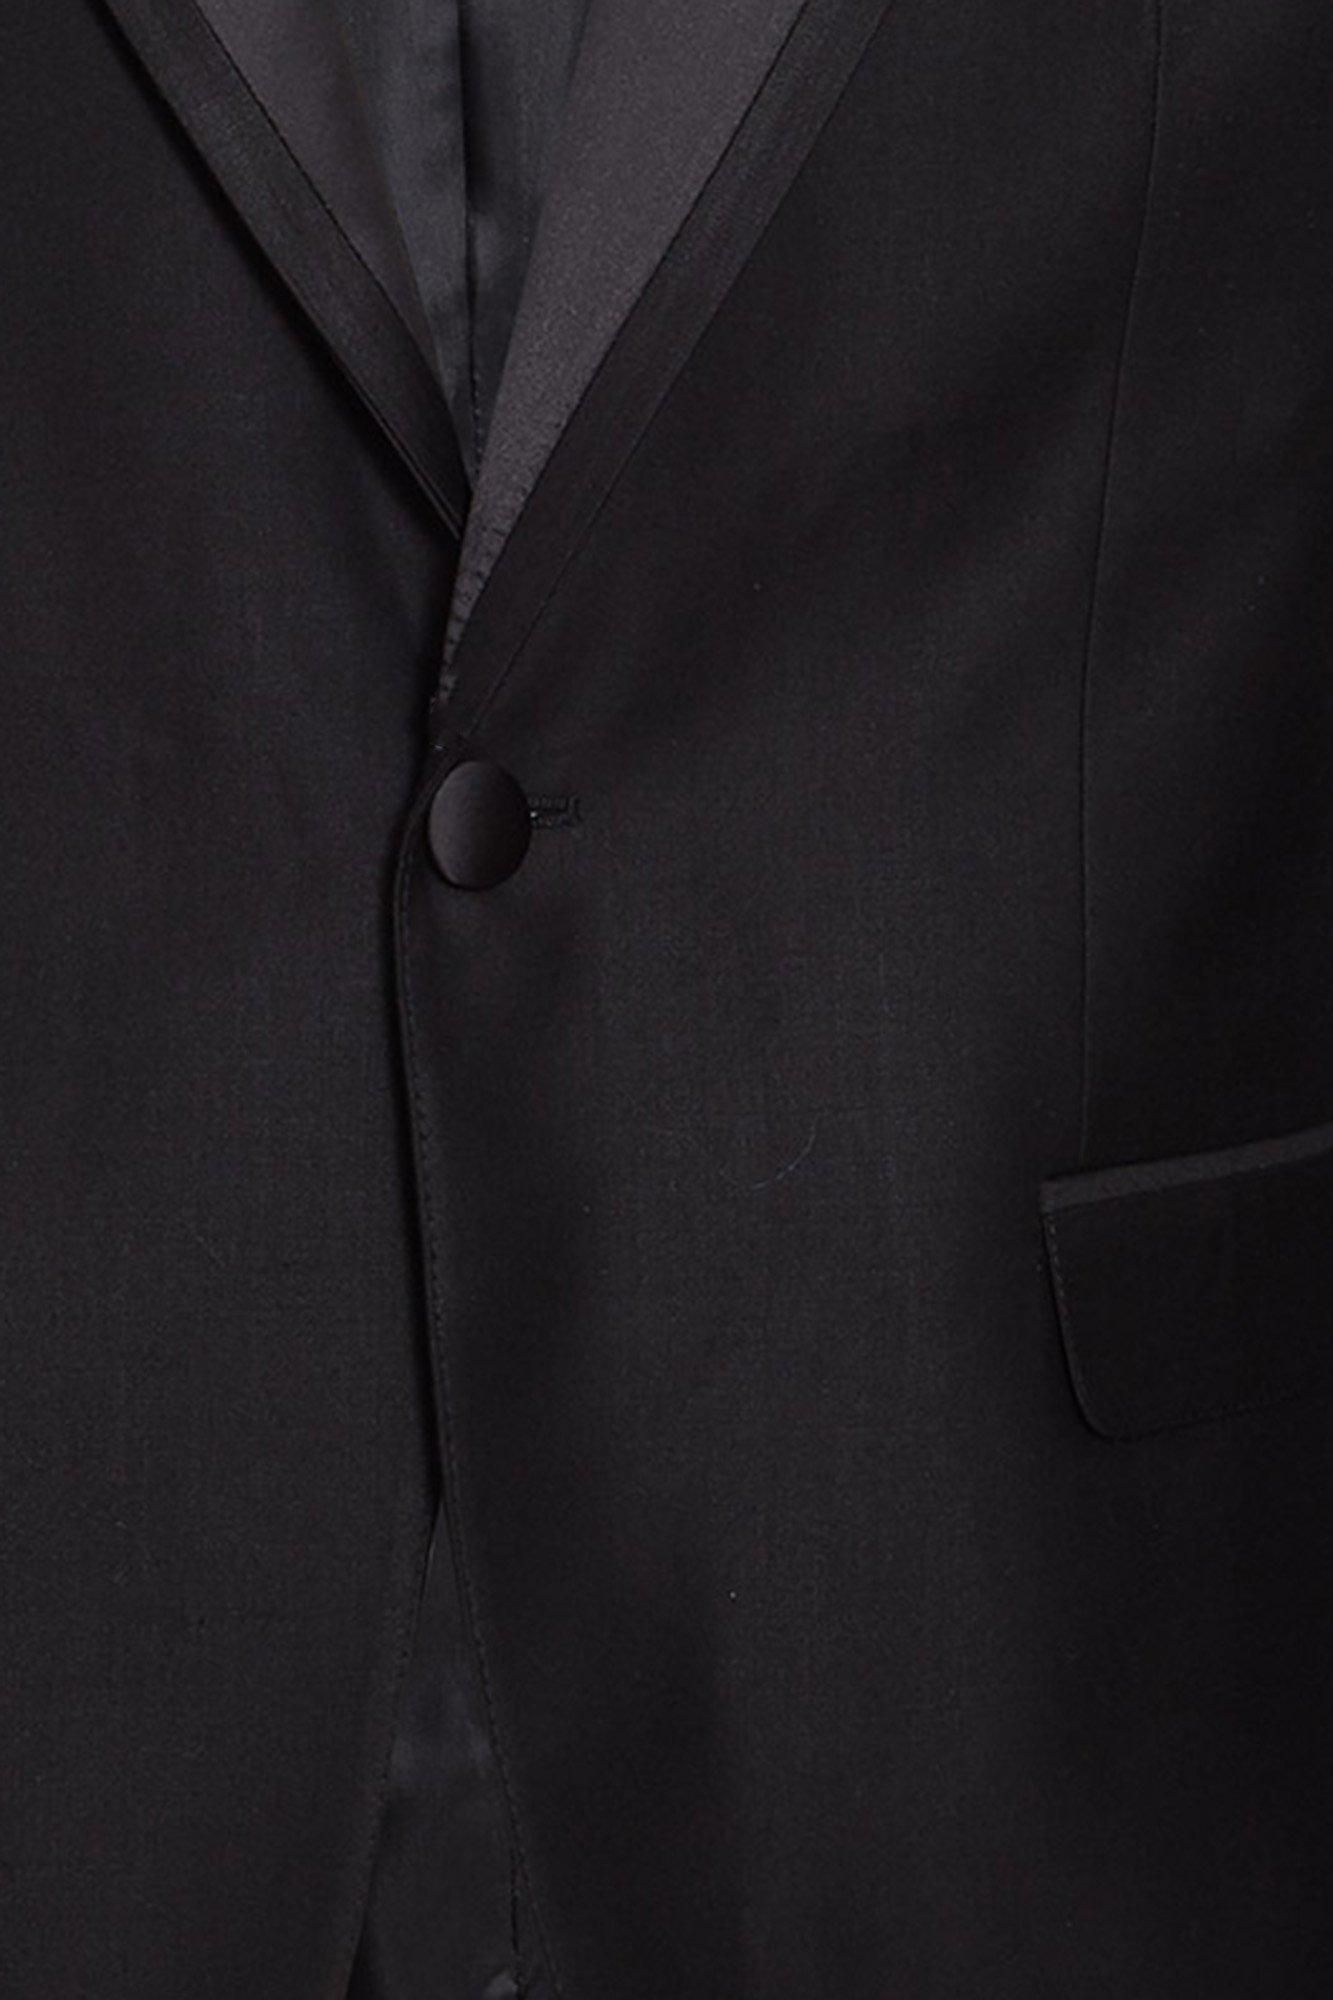 Pocket Square  	Double Vented Back  	Left Breast Pocket  	Functional Side Pockets  	Black Finish Peaked Lapel  	Double button opening  	Lined With Internal Pockets  	Black Signle Button Fastening